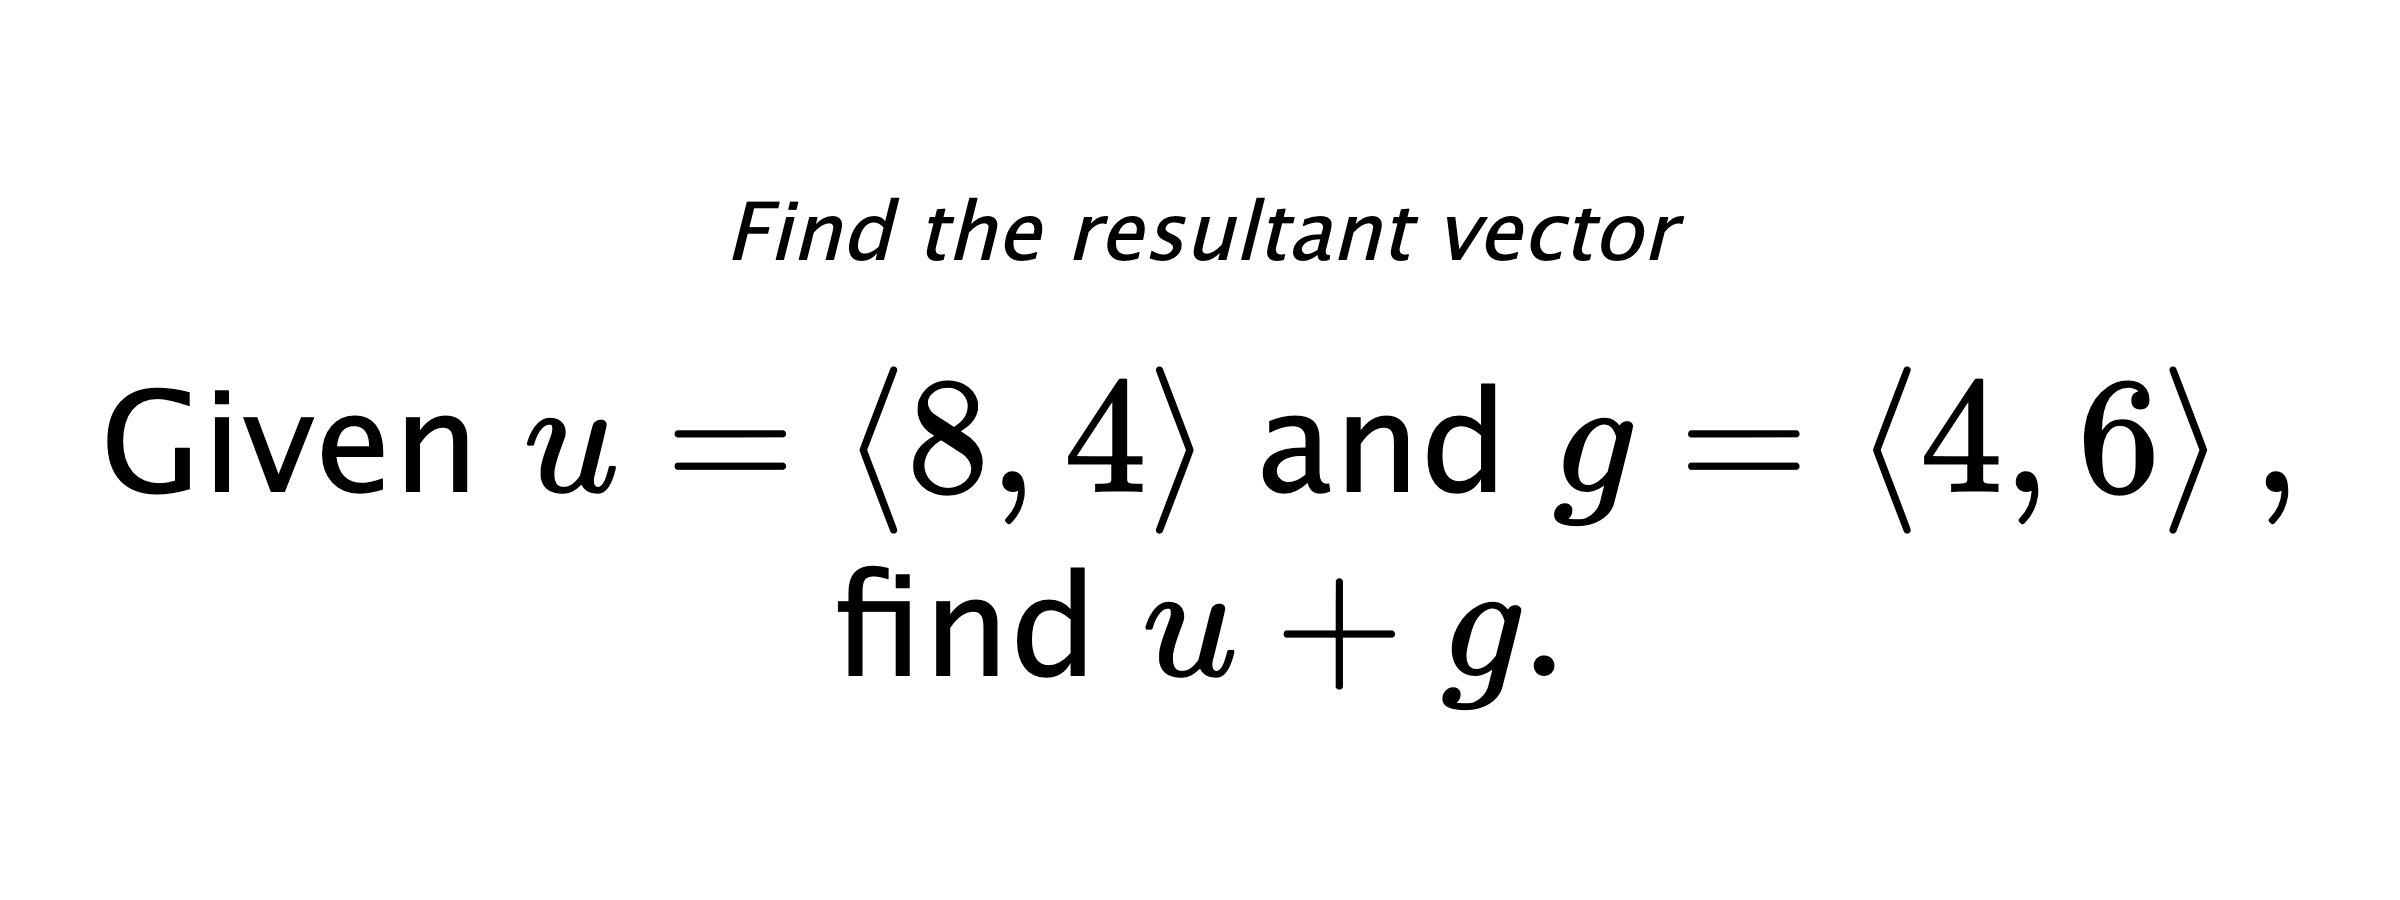 Find the resultant vector Given $ u = \left< 8,4 \right> $ and $ g = \left< 4,6 \right> ,$ find $ u+g .$